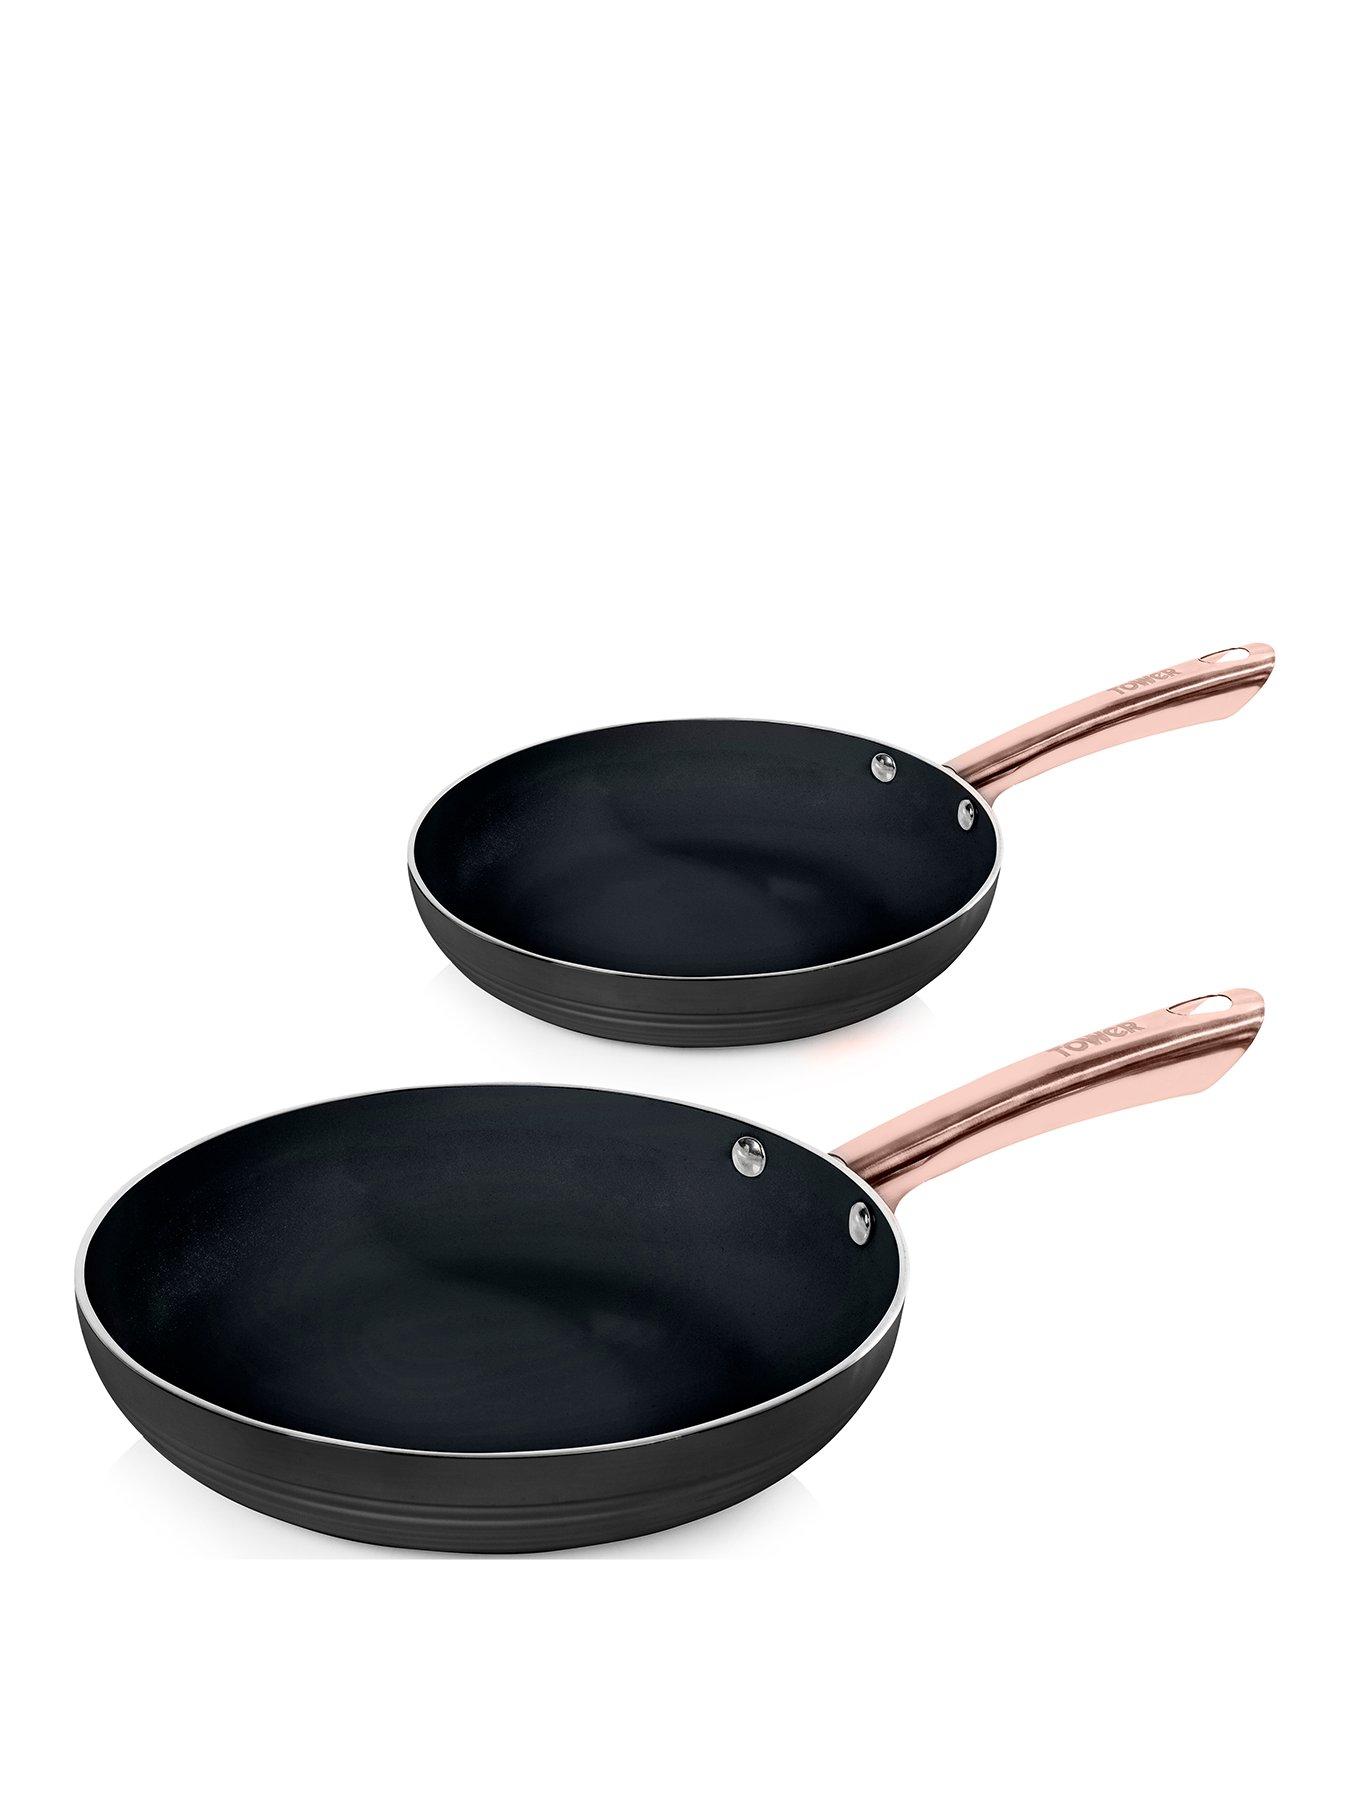 Tower Rose Gold Frying Pan Set 24 and 28 cm, Non Stick and Easy to Clean,  White, 2 Piece